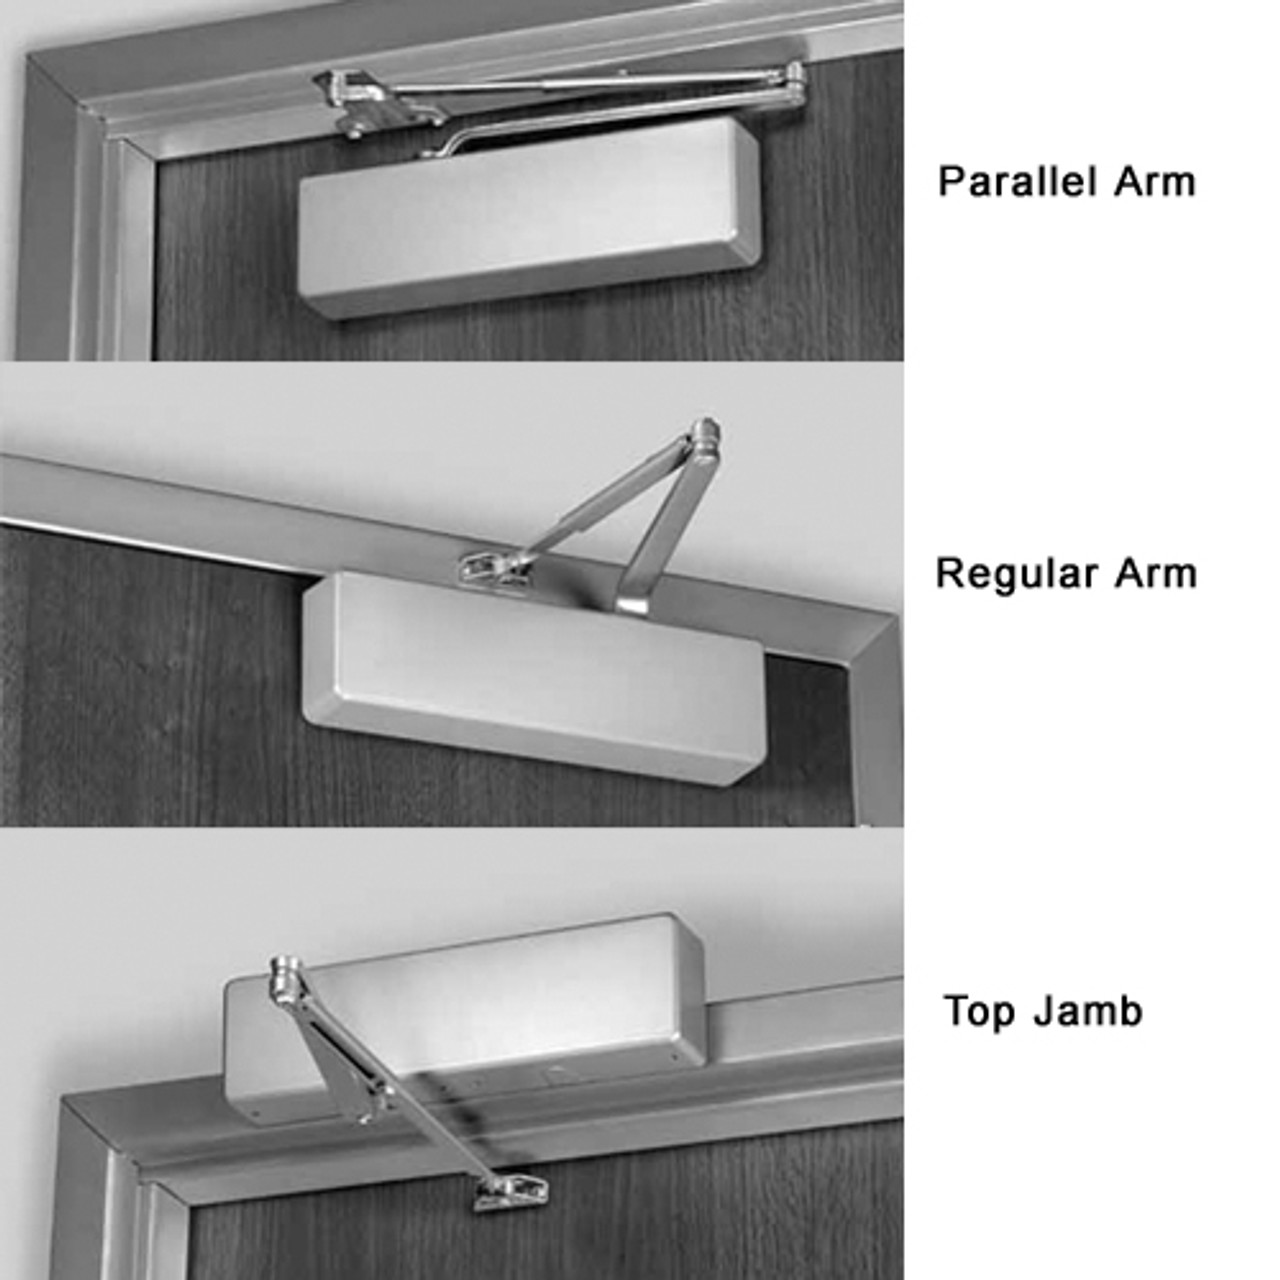 7500HM-690 Norton 7500 Series Hold Open Institutional Door Closer with Regular Parallel or Top Jamb to 3 inch Reveal in Statuary Bronze